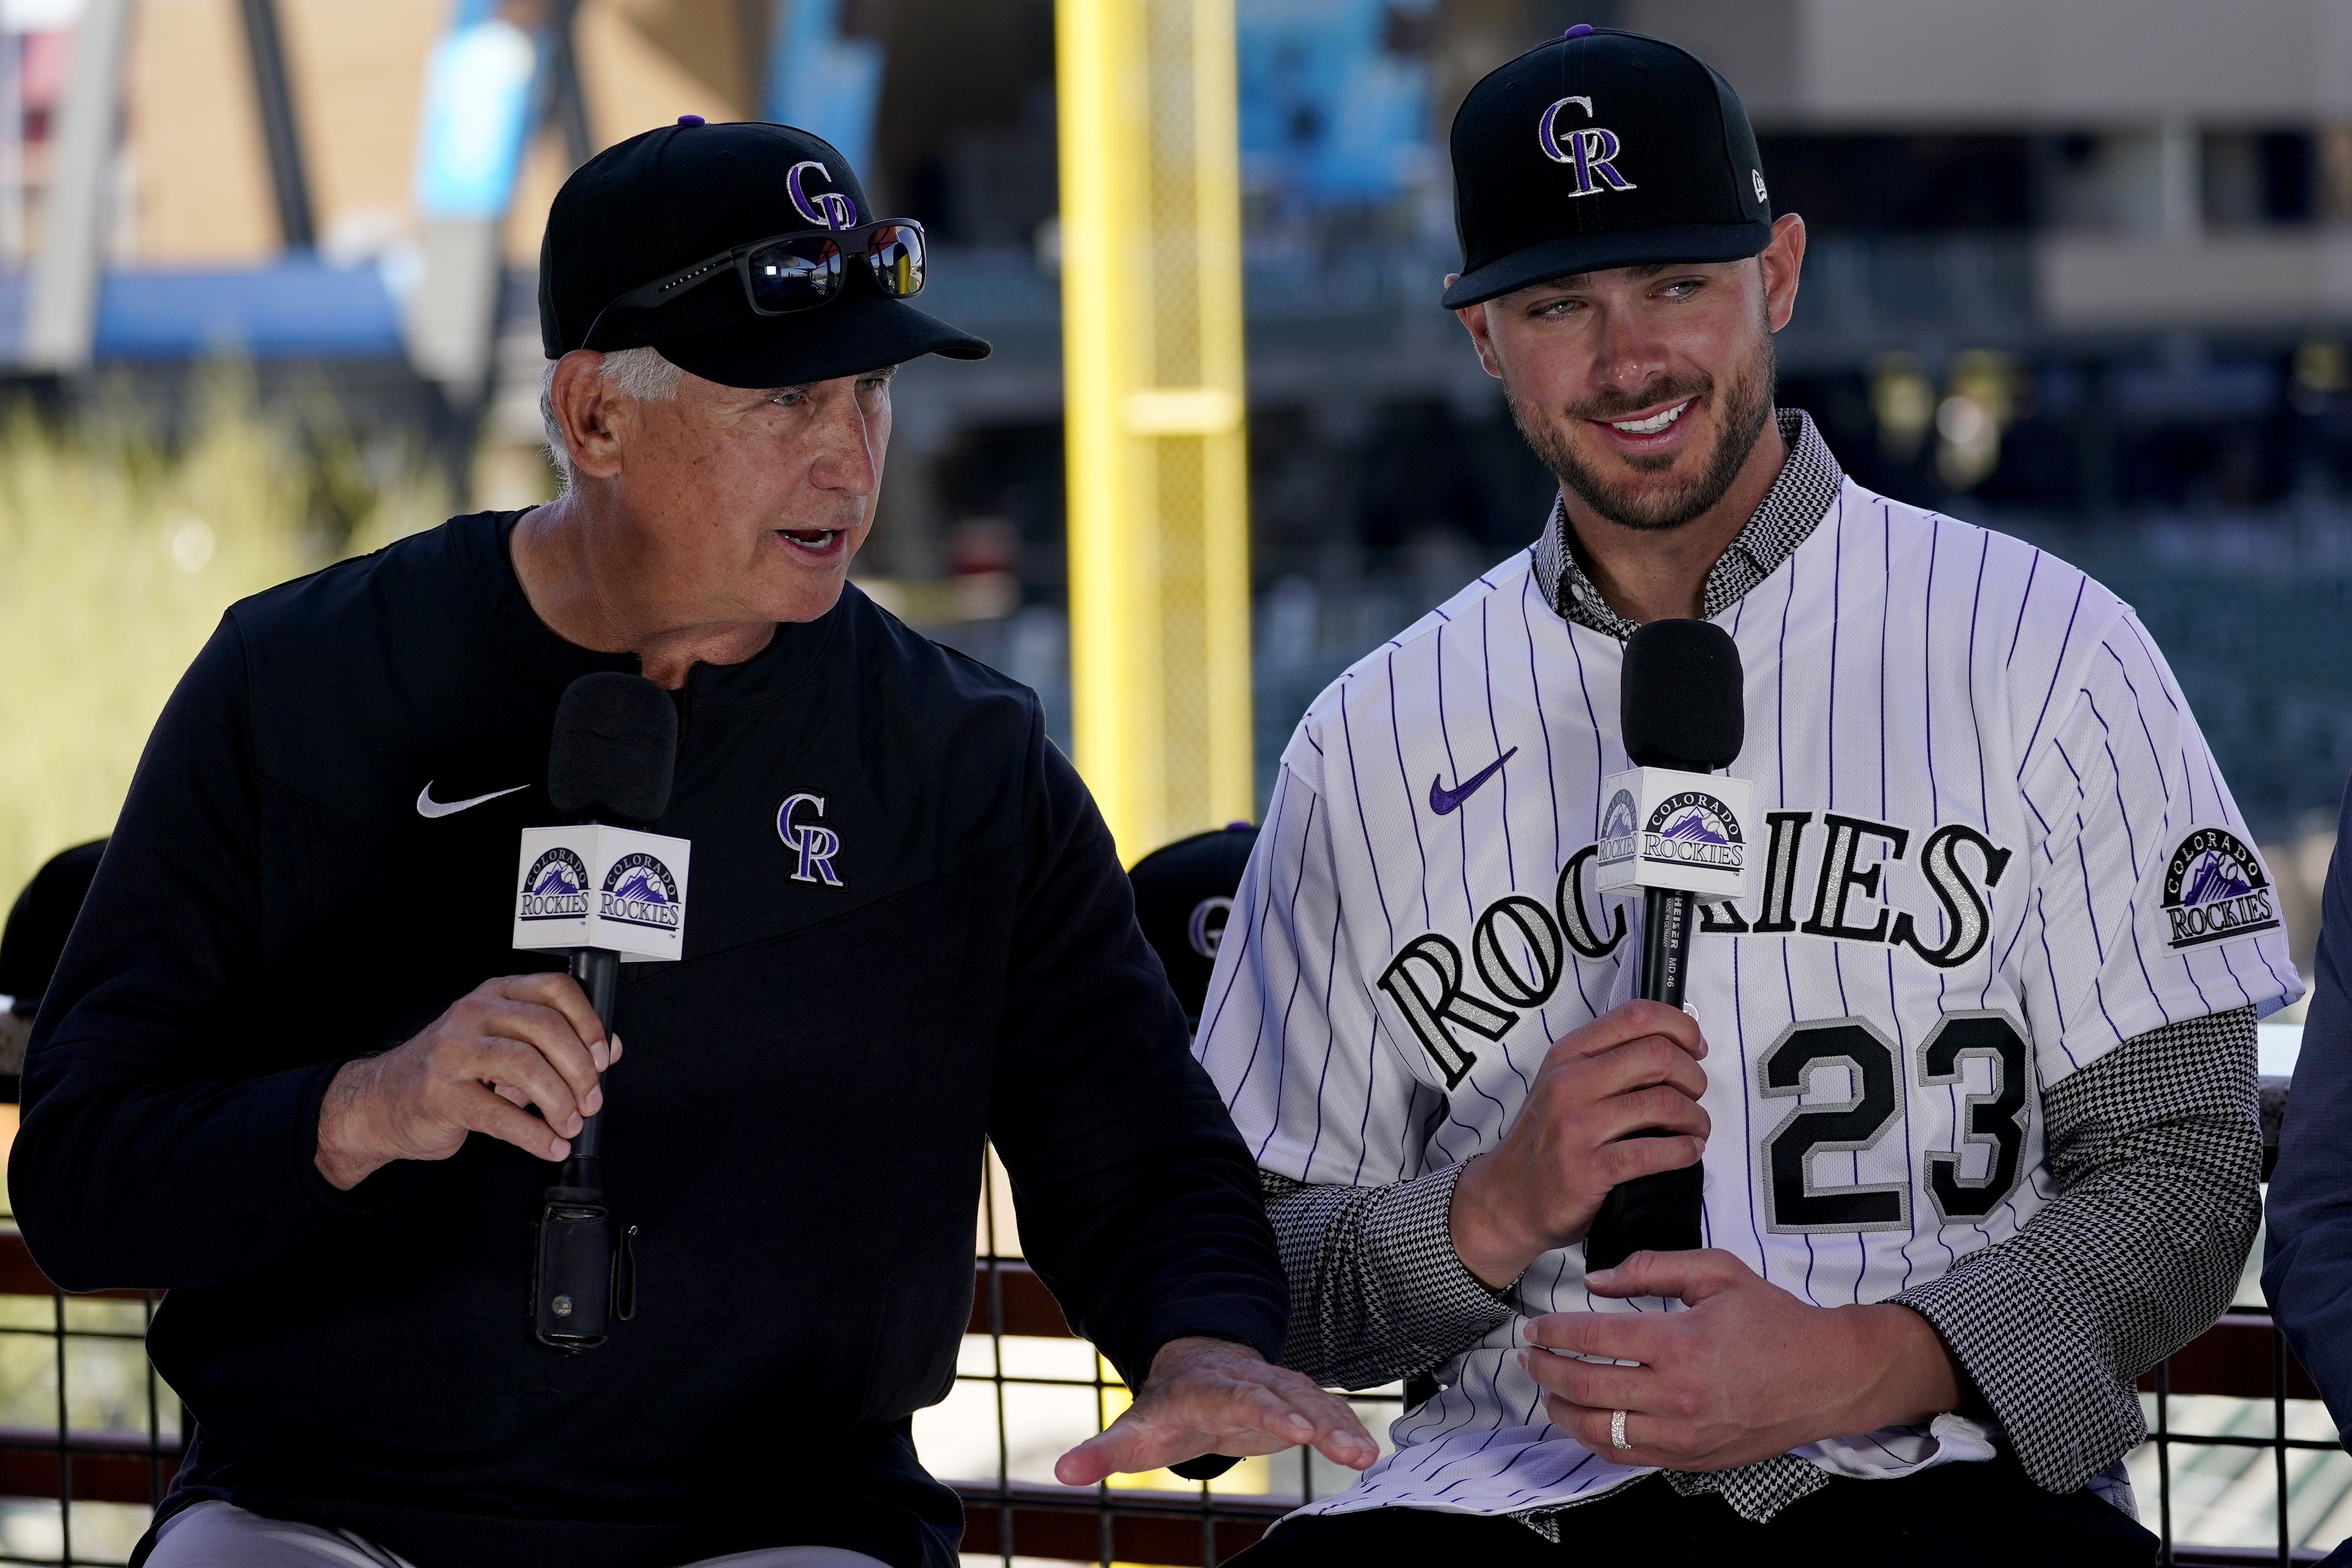 Kris Bryant, Rockies finalize $182M, 7-year contract